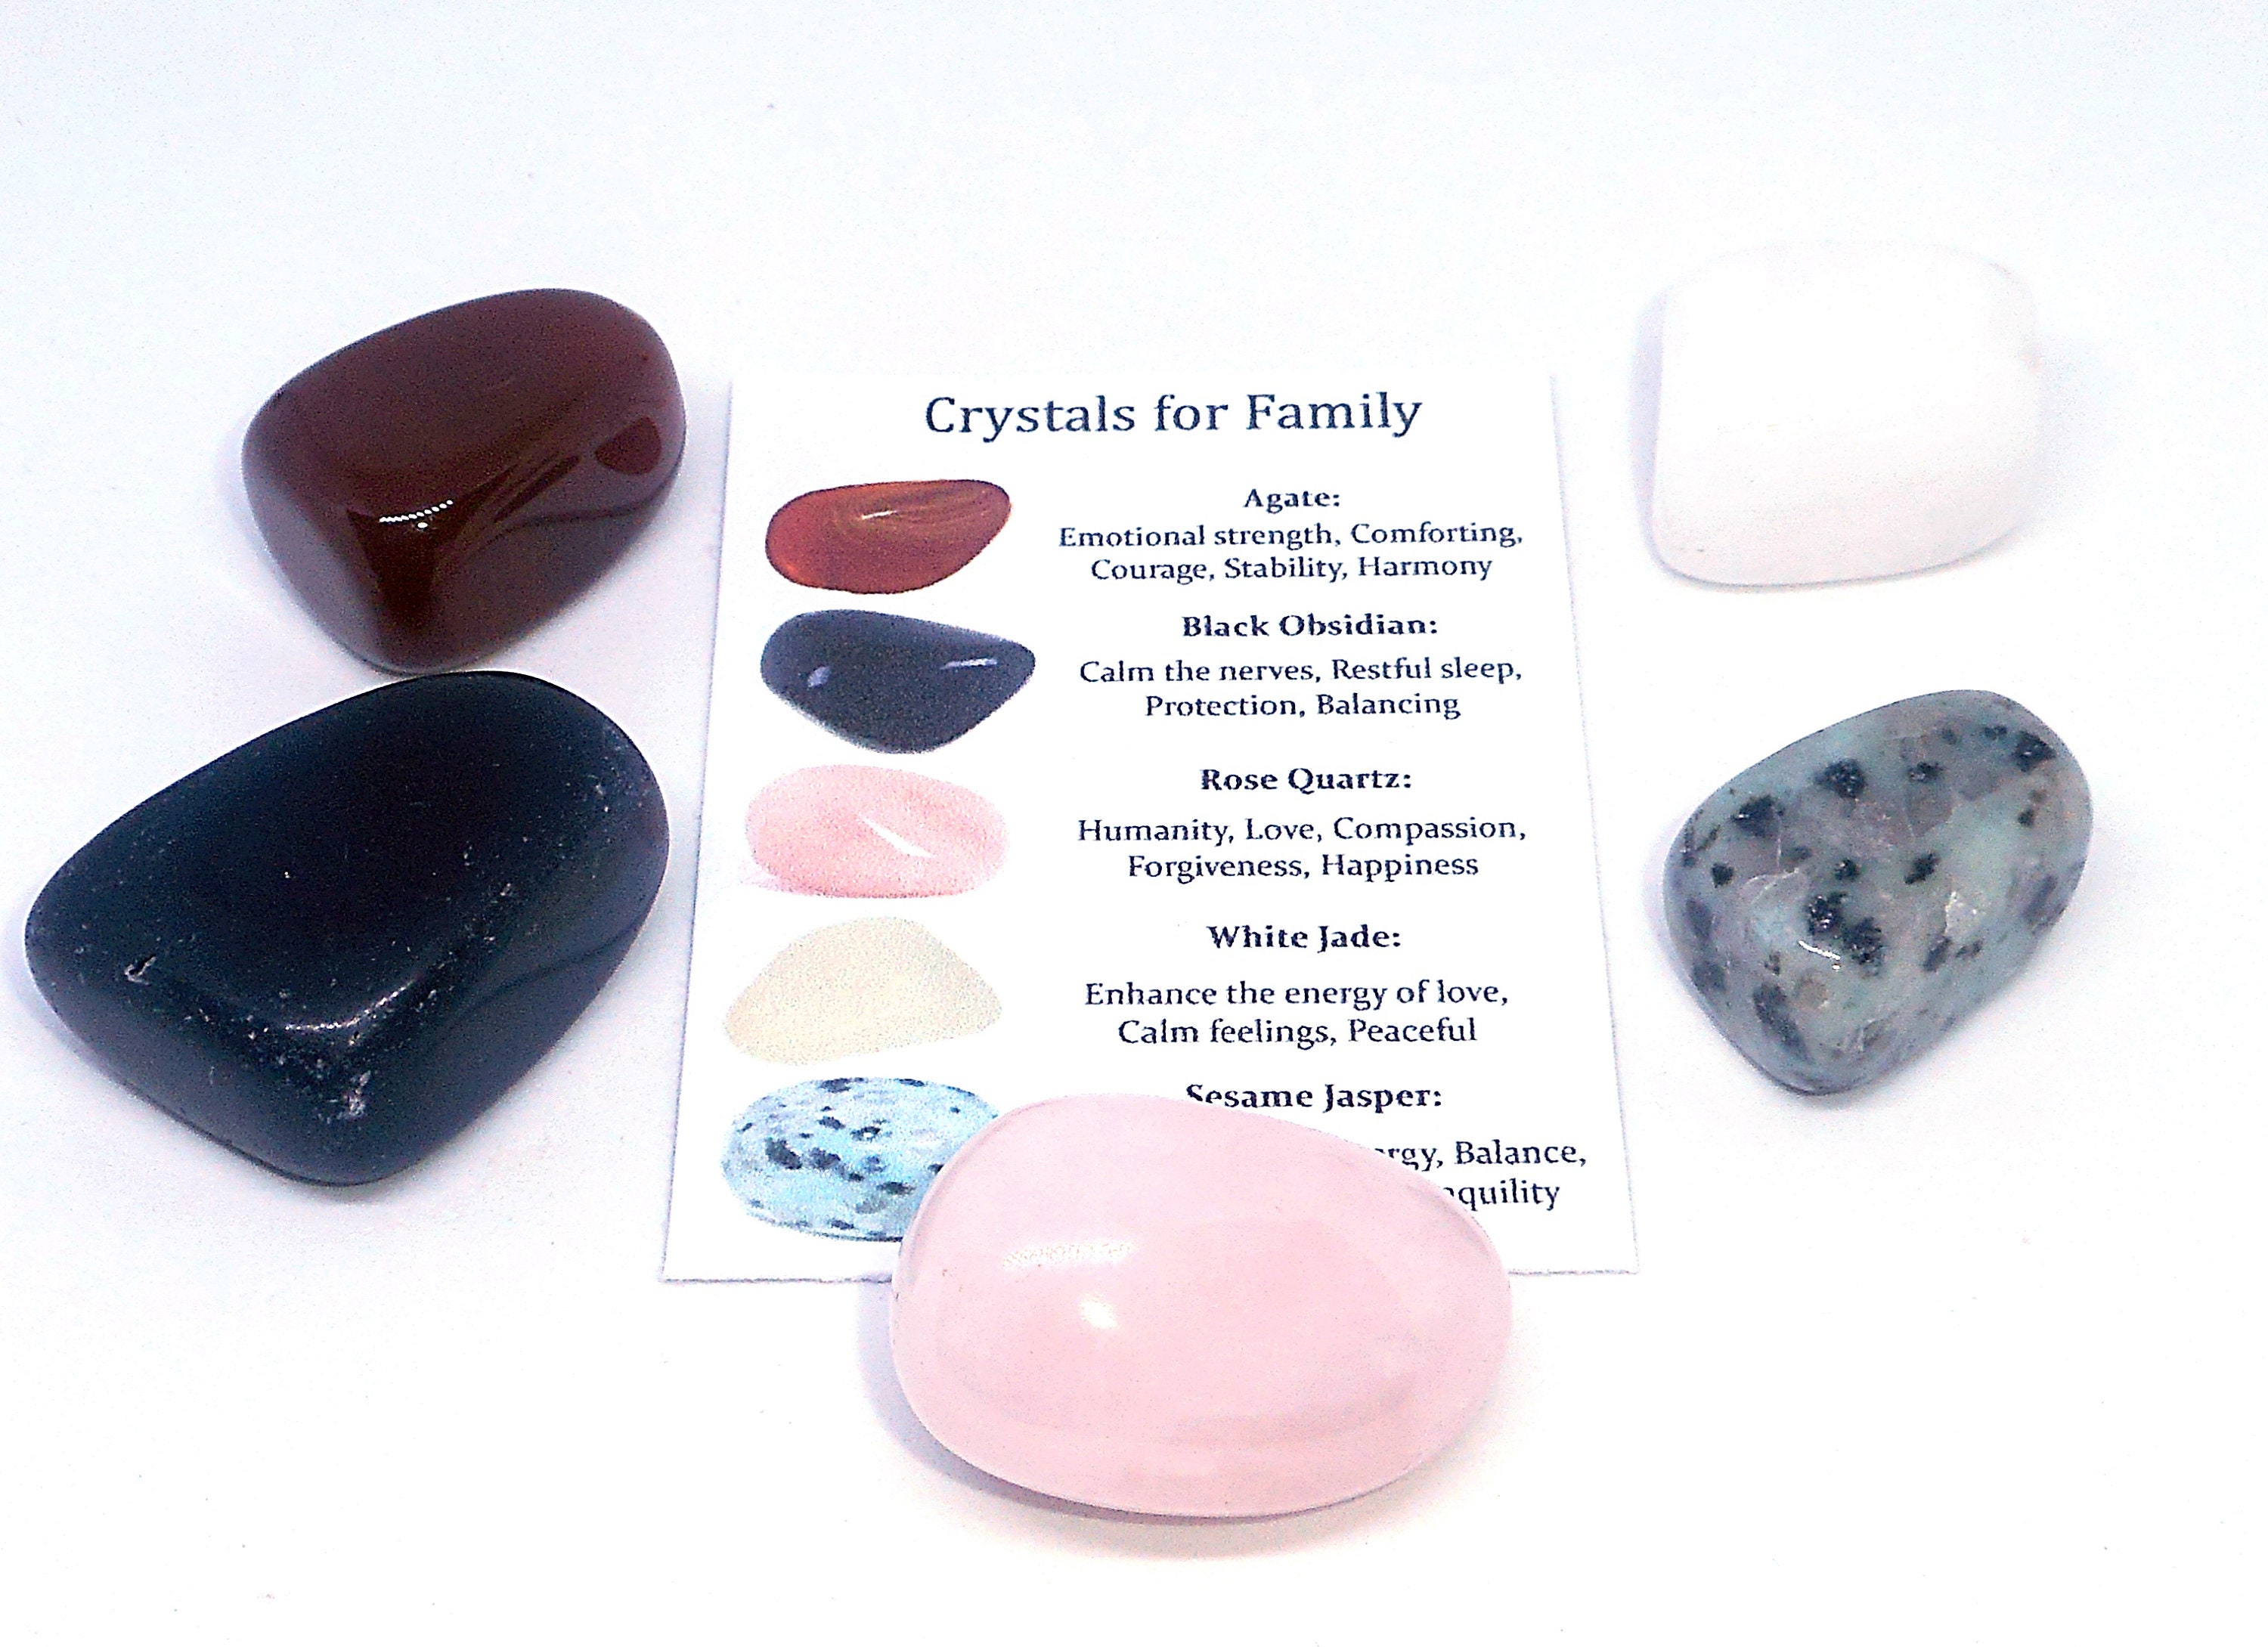 The 5 Best Gemstones for Protection - Crystals by Lina